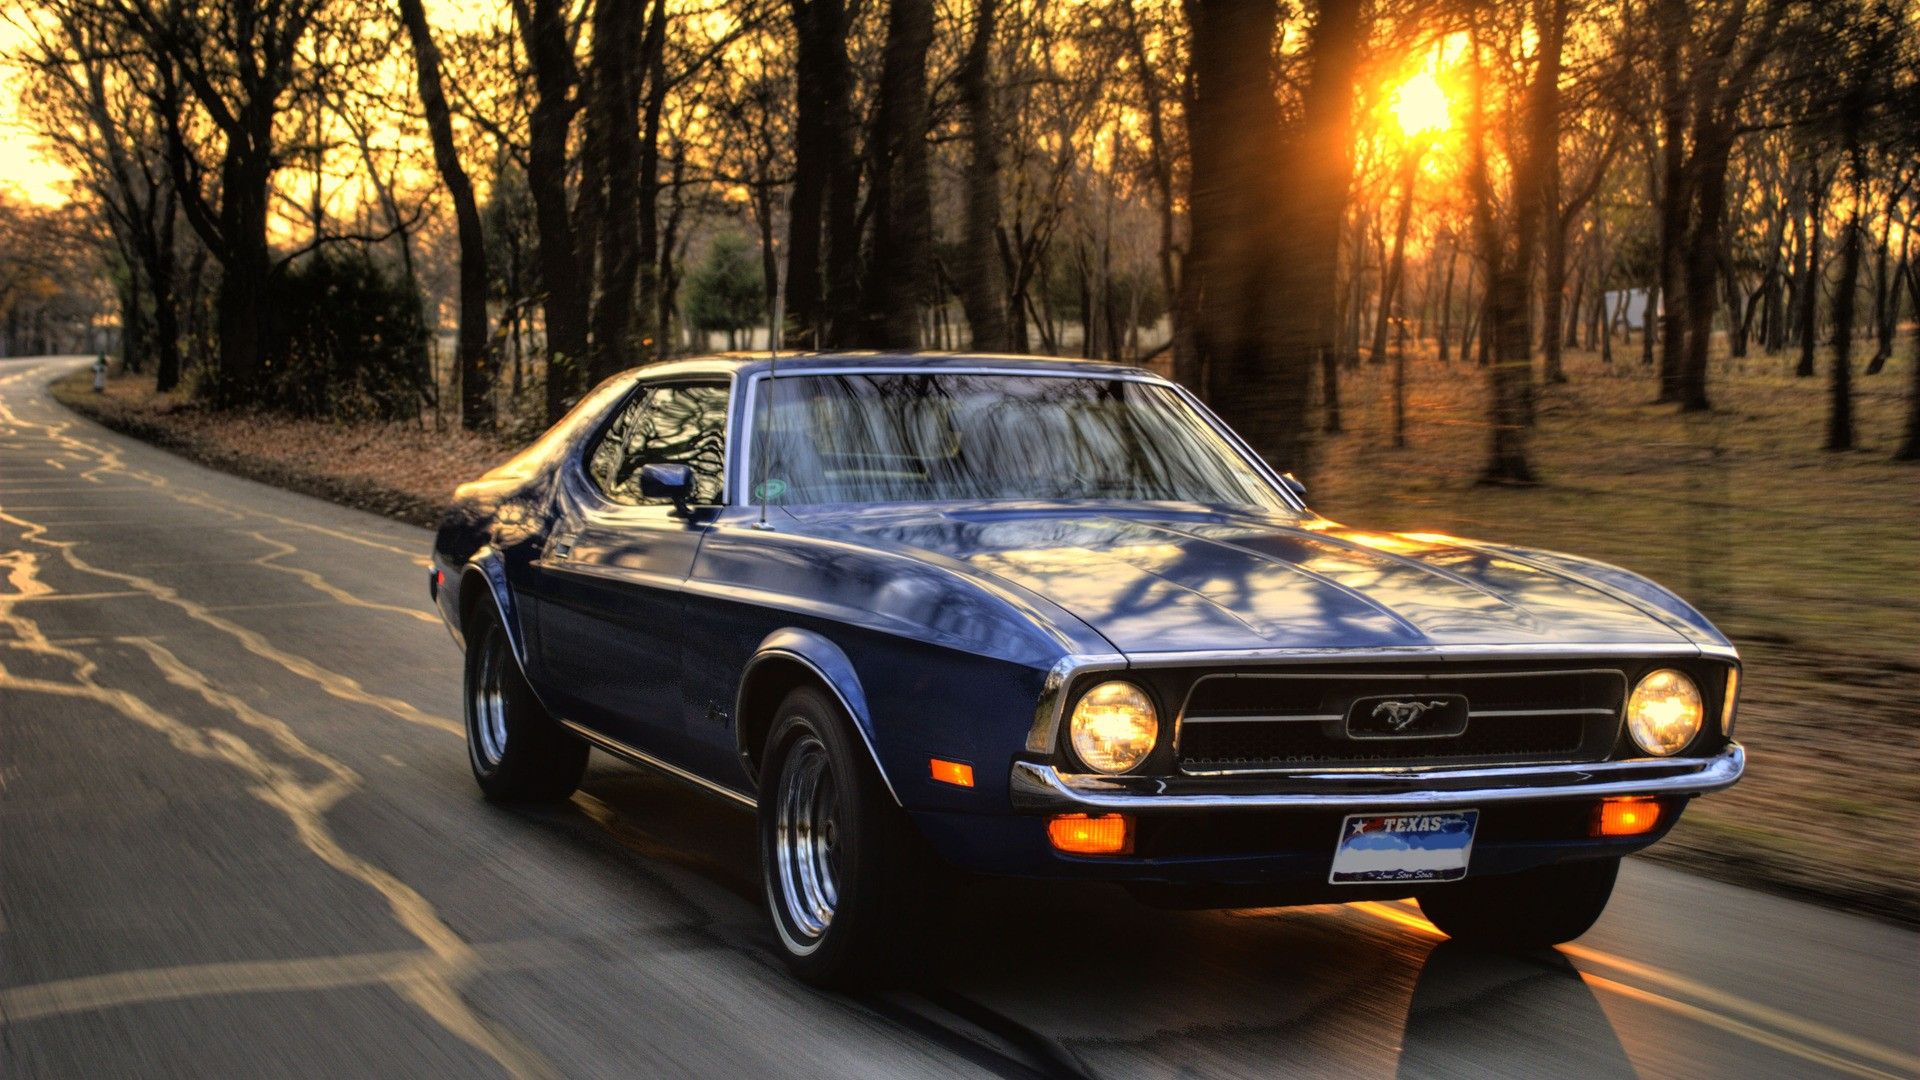 car, Ford, Ford Mustang, Sunset, Trees, Road, Muscle Cars Wallpaper HD / Desktop and Mobile Background